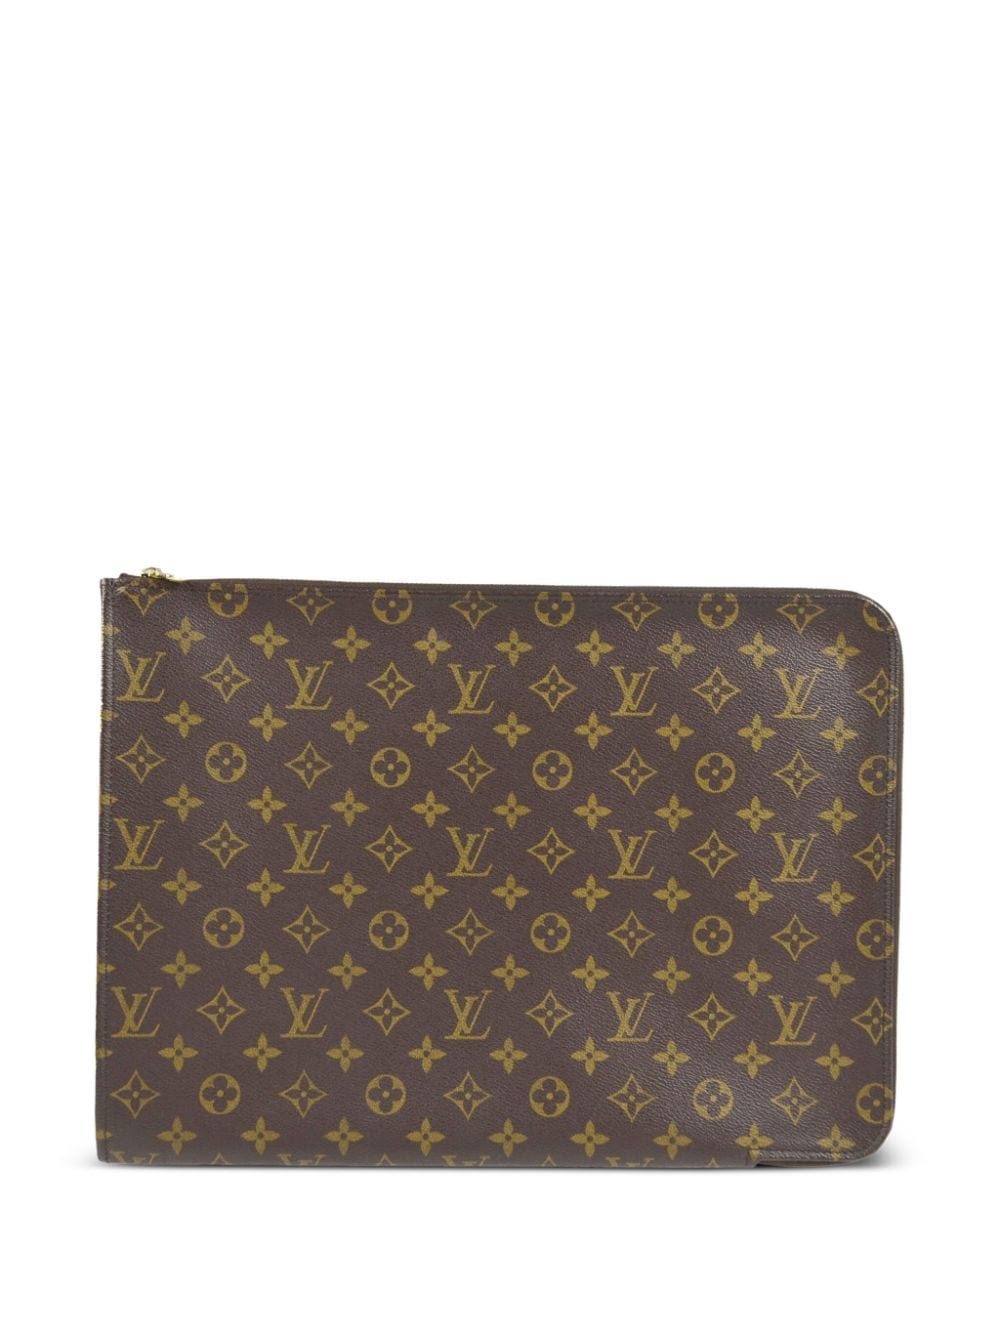 Louis Vuitton 2002 Pre-owned Idylle Neverfull Tote Bag